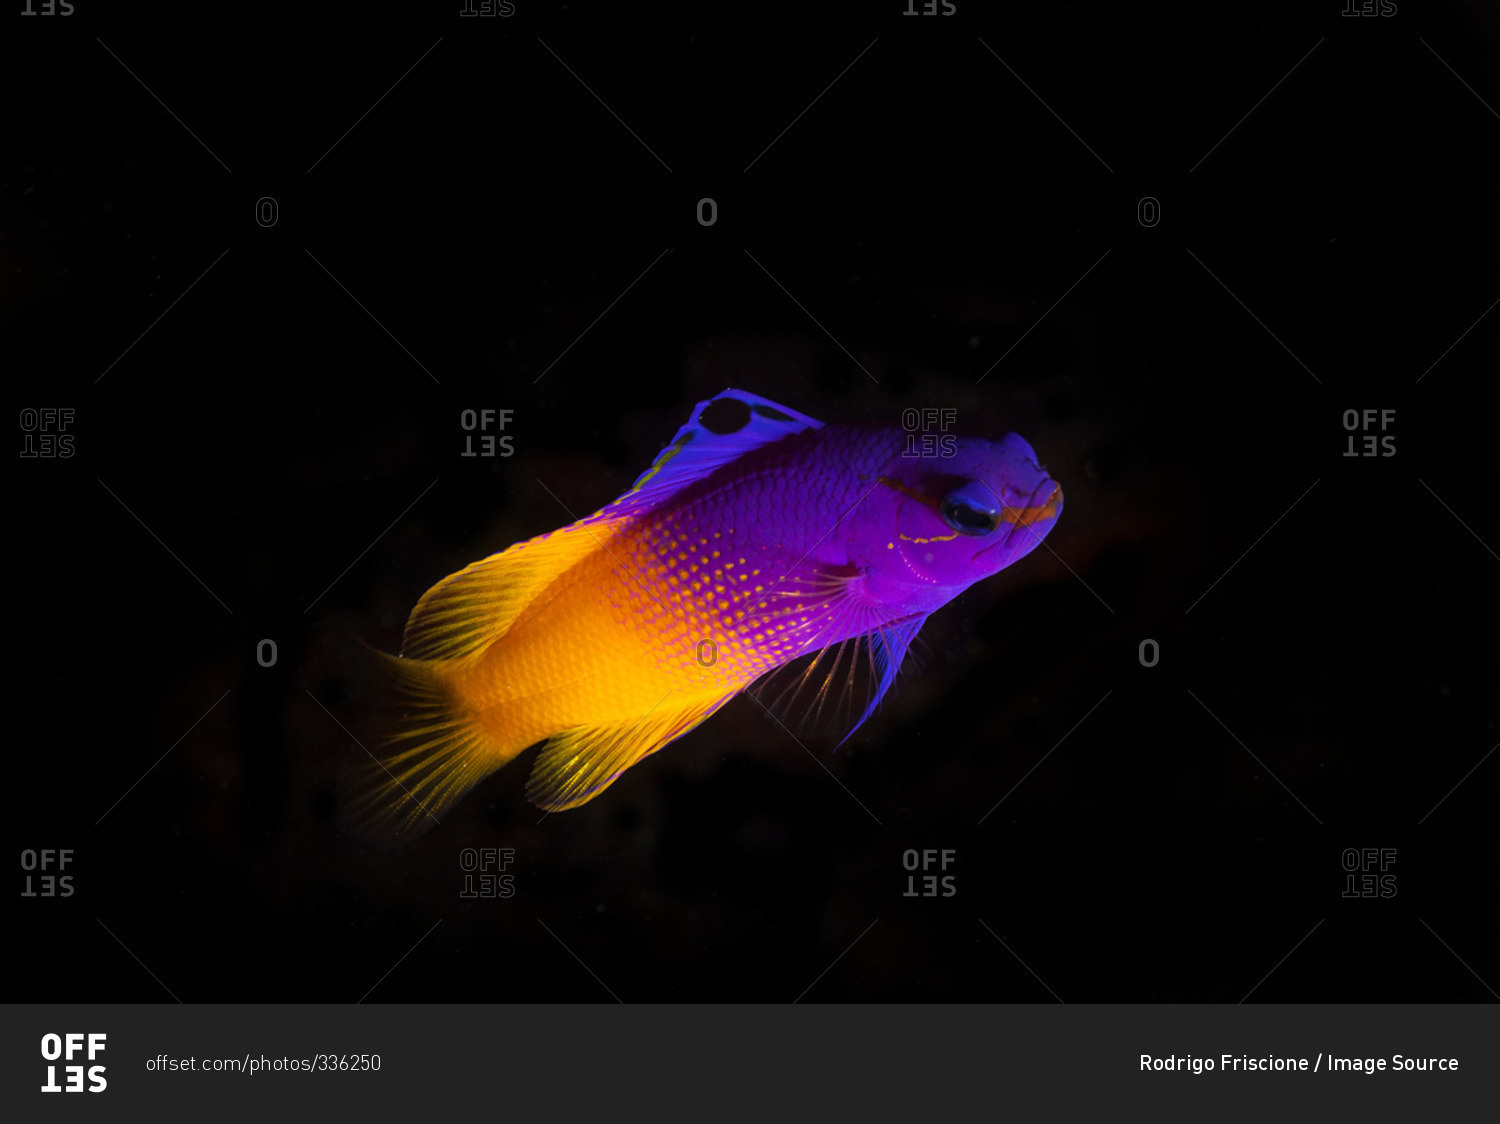 Underwater side view of royal gramma fish against dark background, Cancun, Mexico